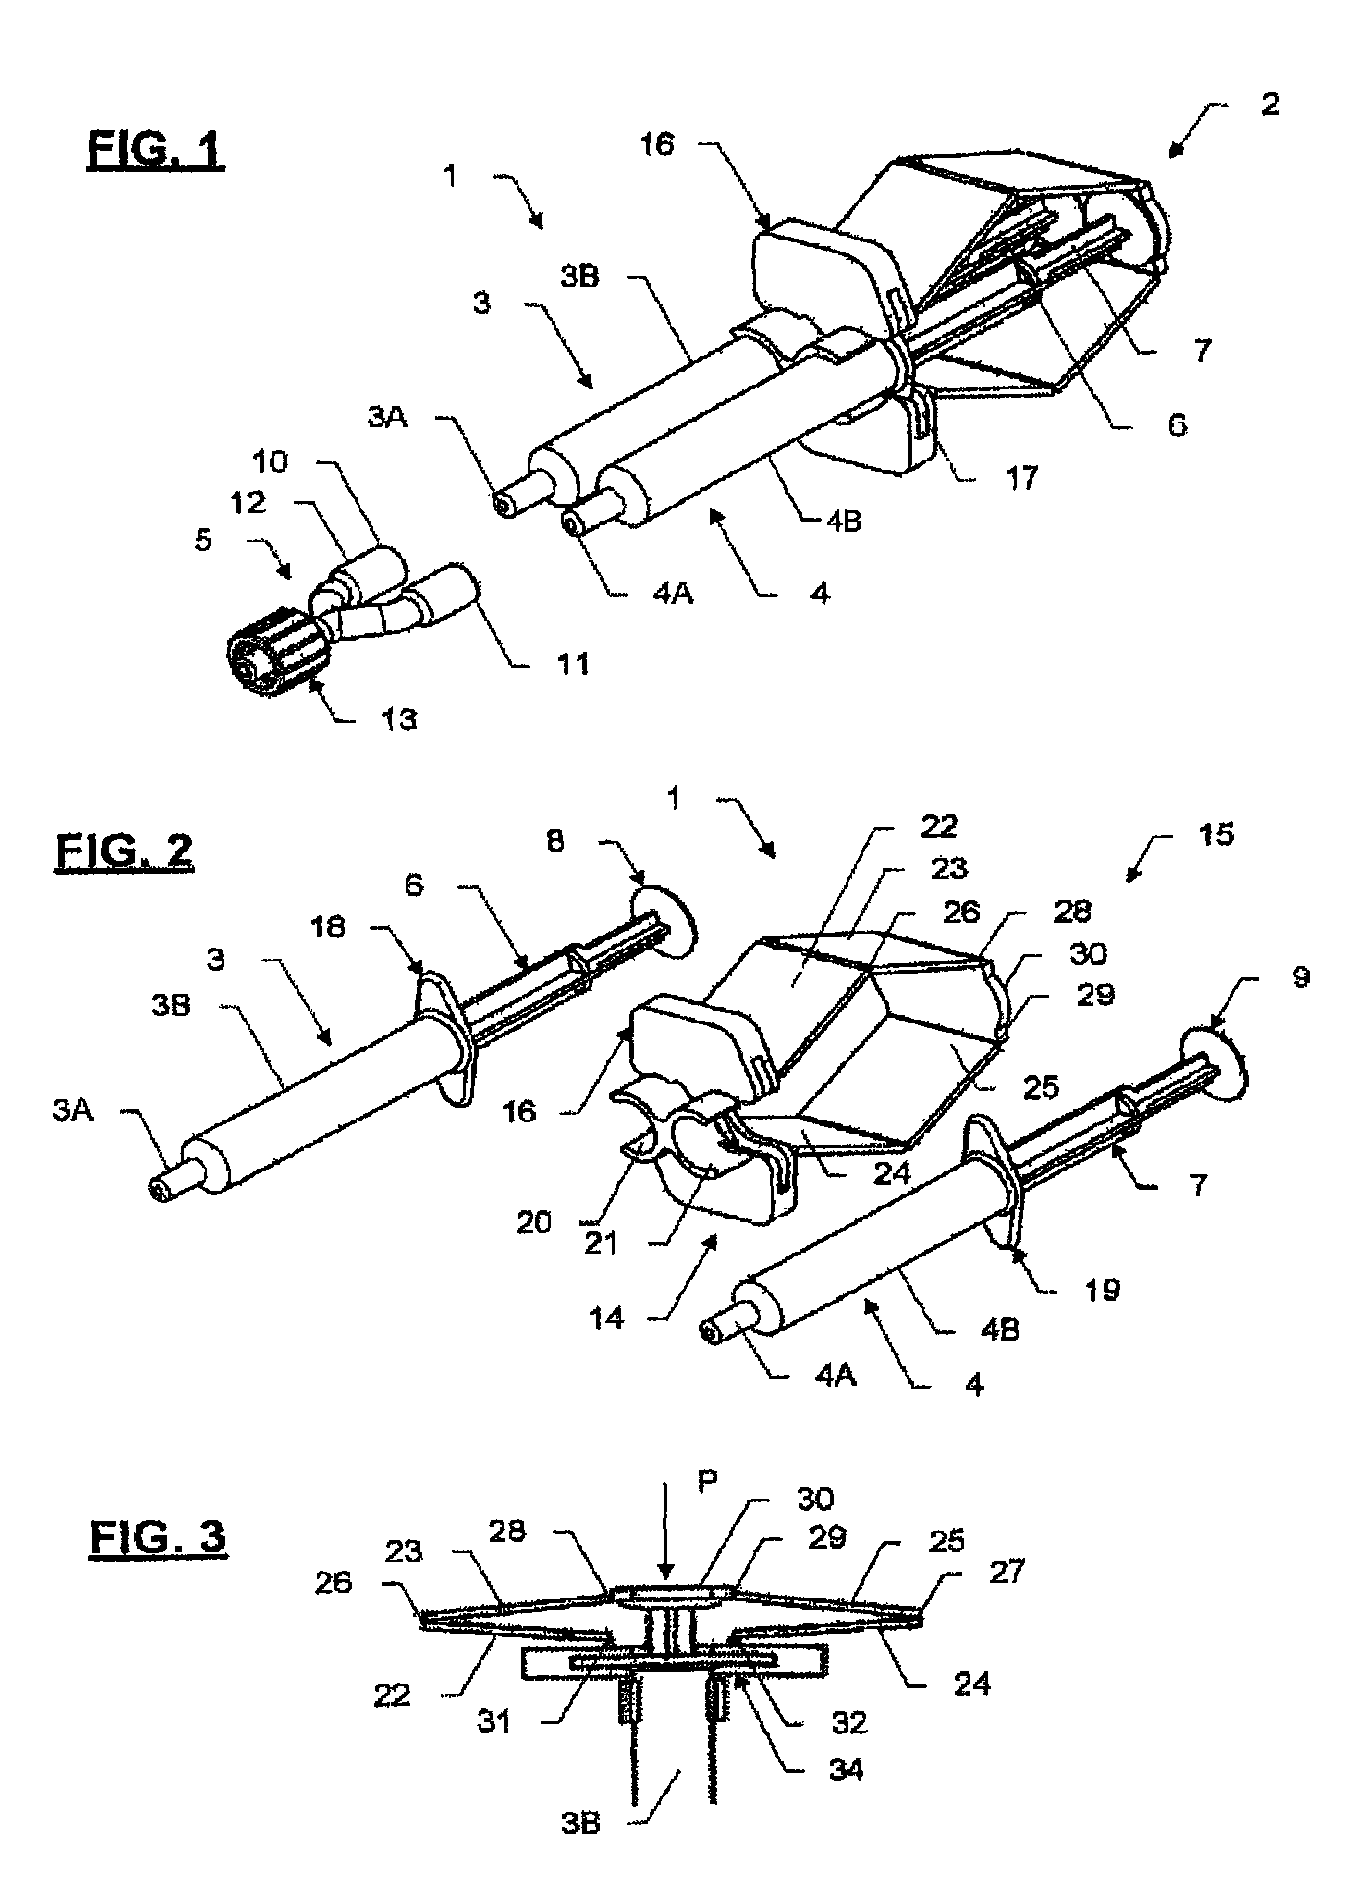 Dispensing assembly with separate syringes and syringe holder